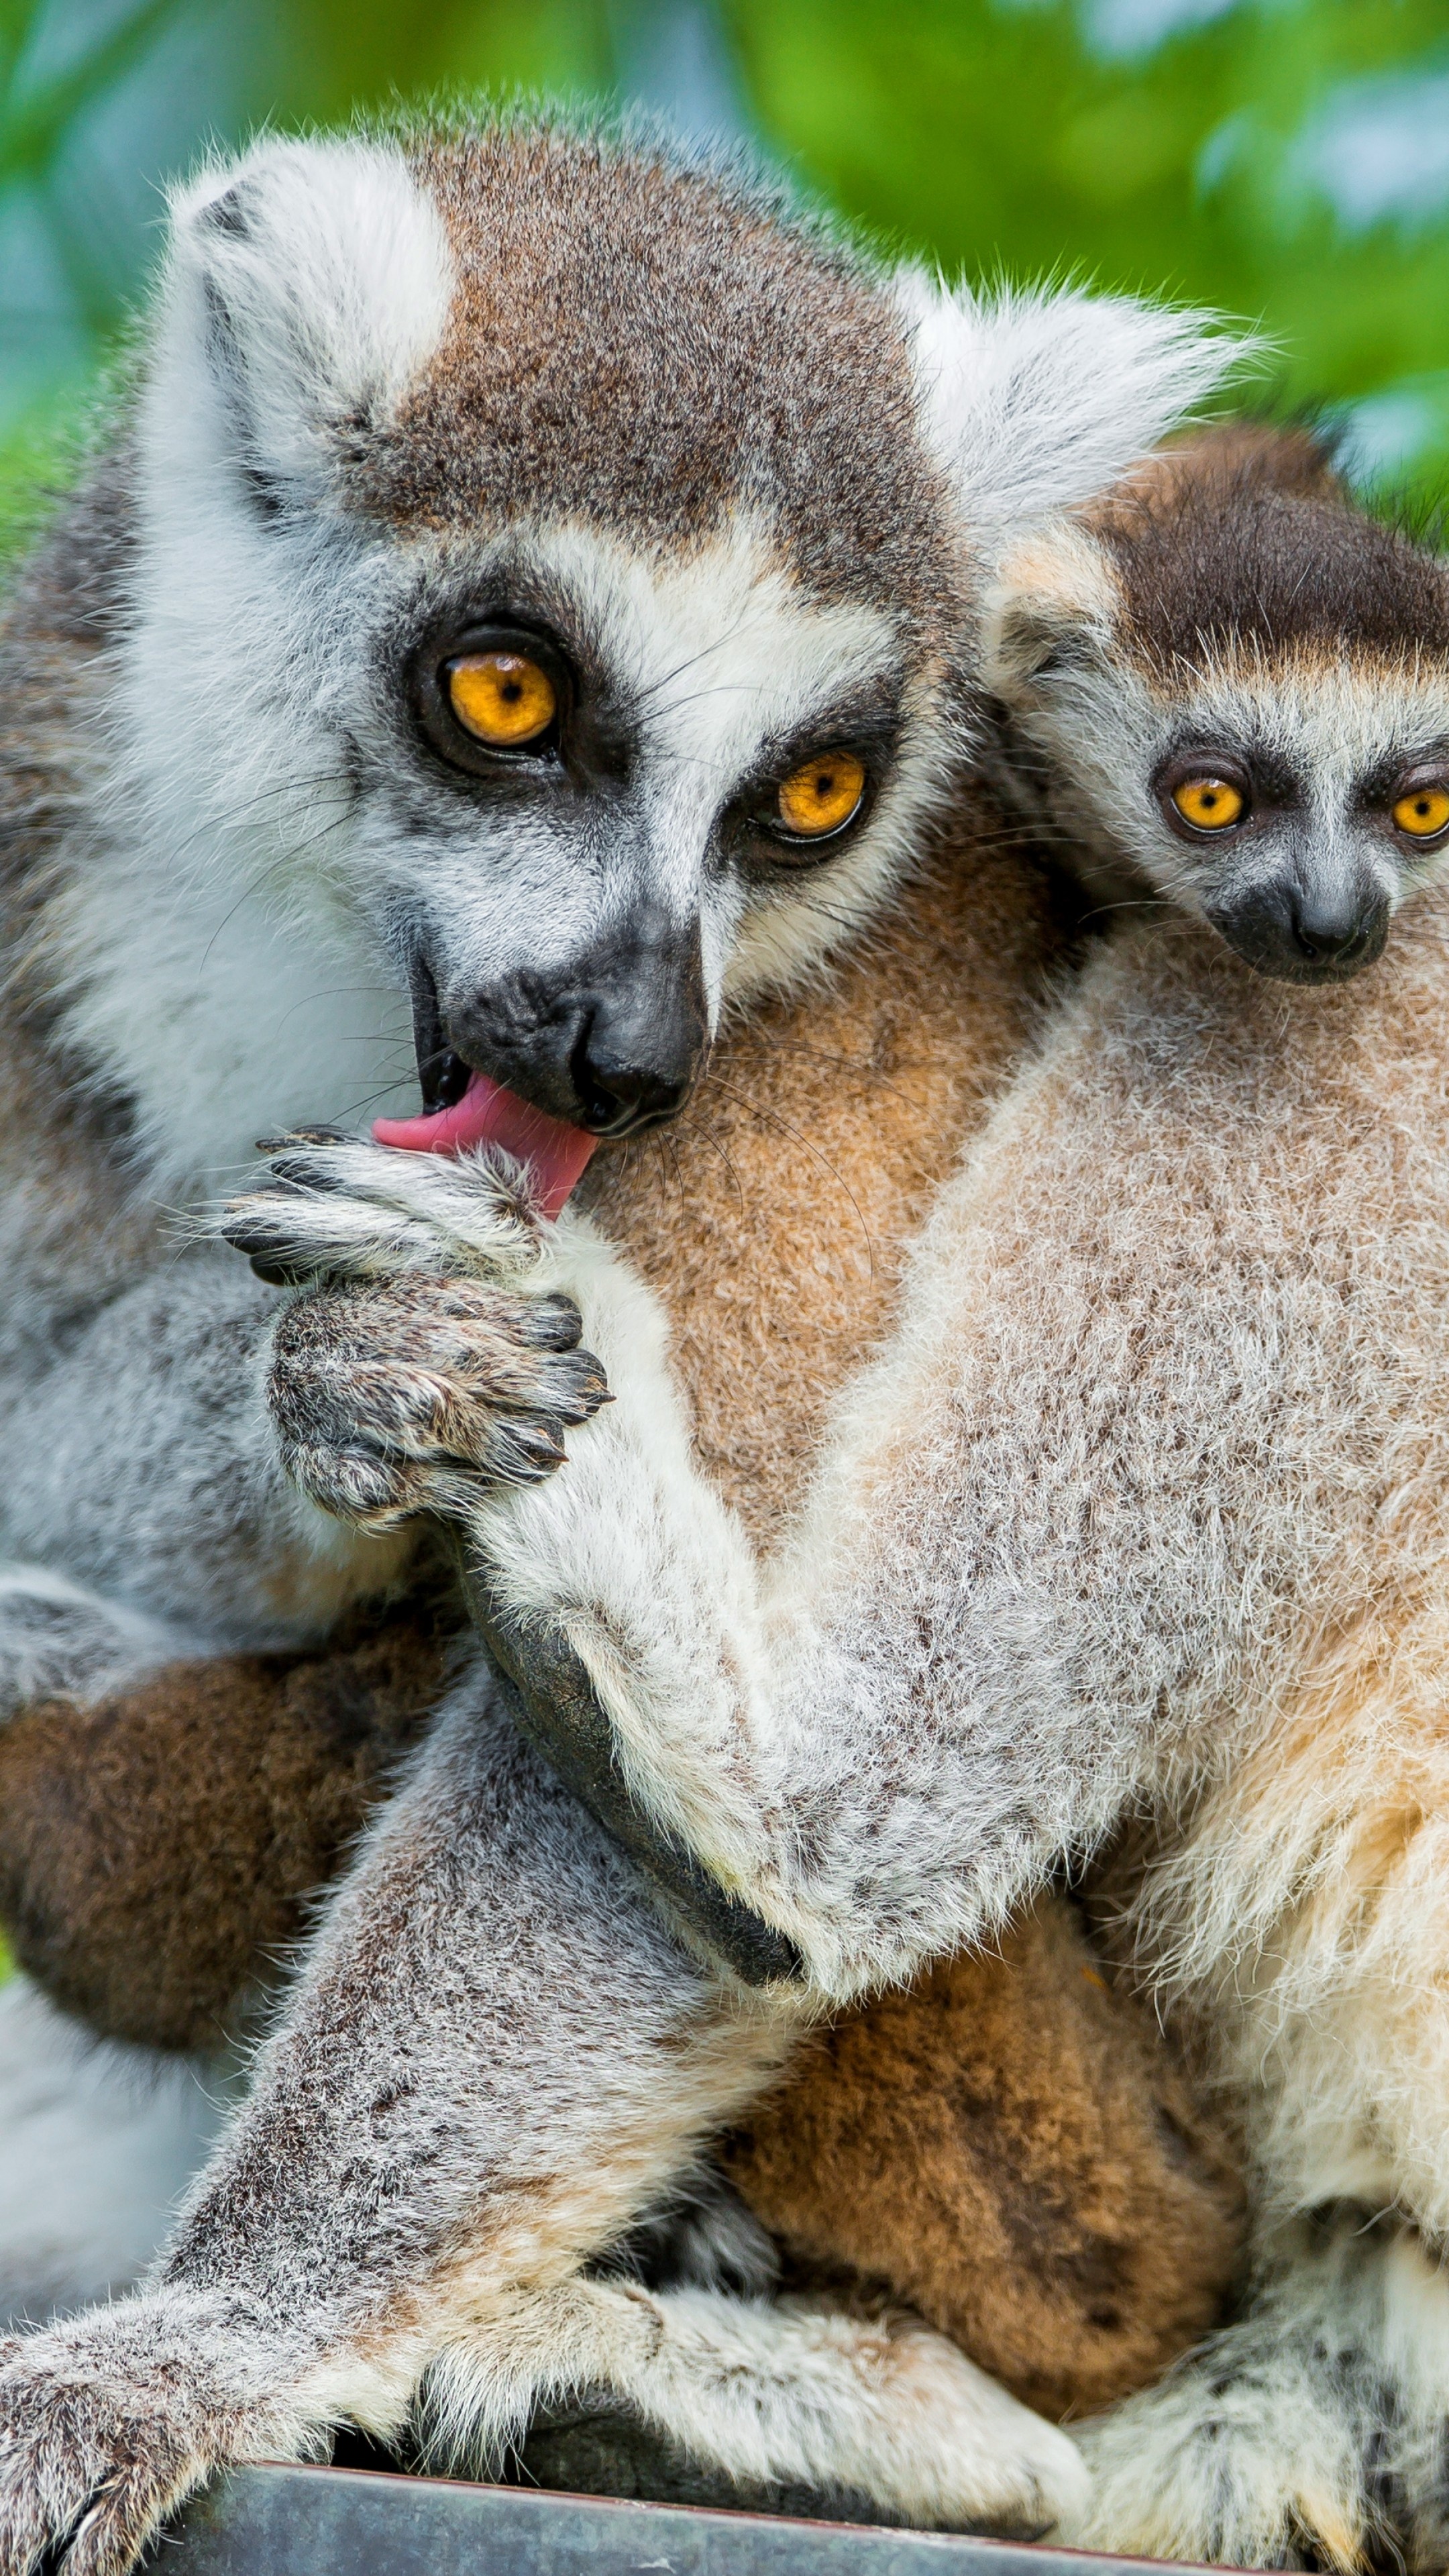 Lemur wallpapers, Cute animal collection, Summer vibes, Nature's wonders, 2160x3840 4K Handy